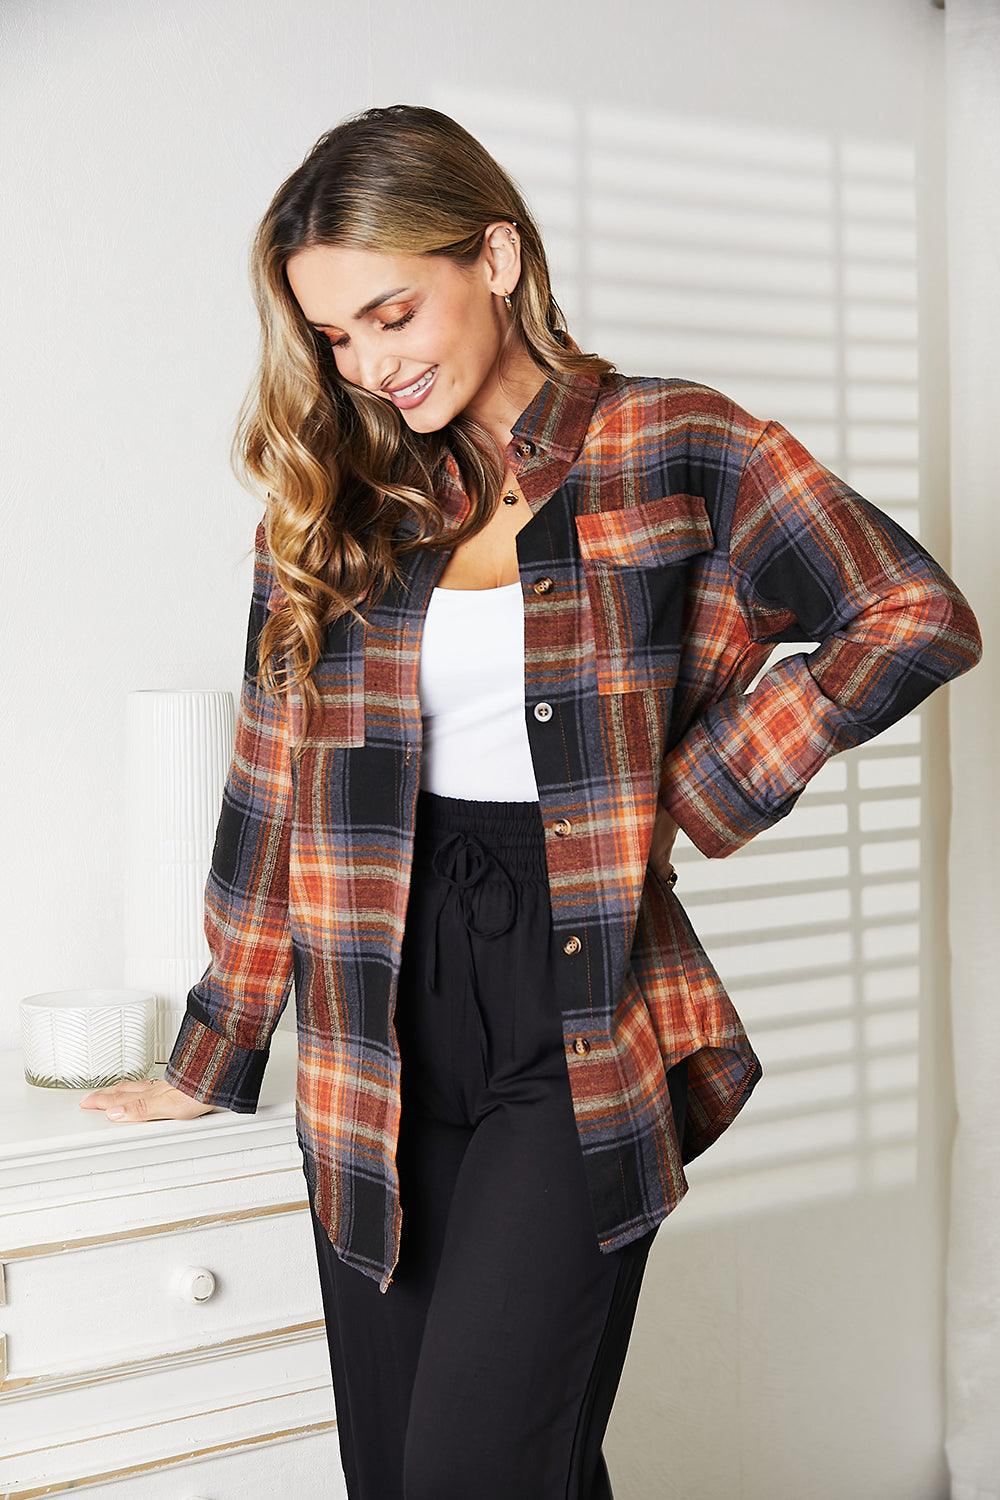 Women's Plaid Long Sleeve Button-Up Shirt - Inspired Eye Boutique